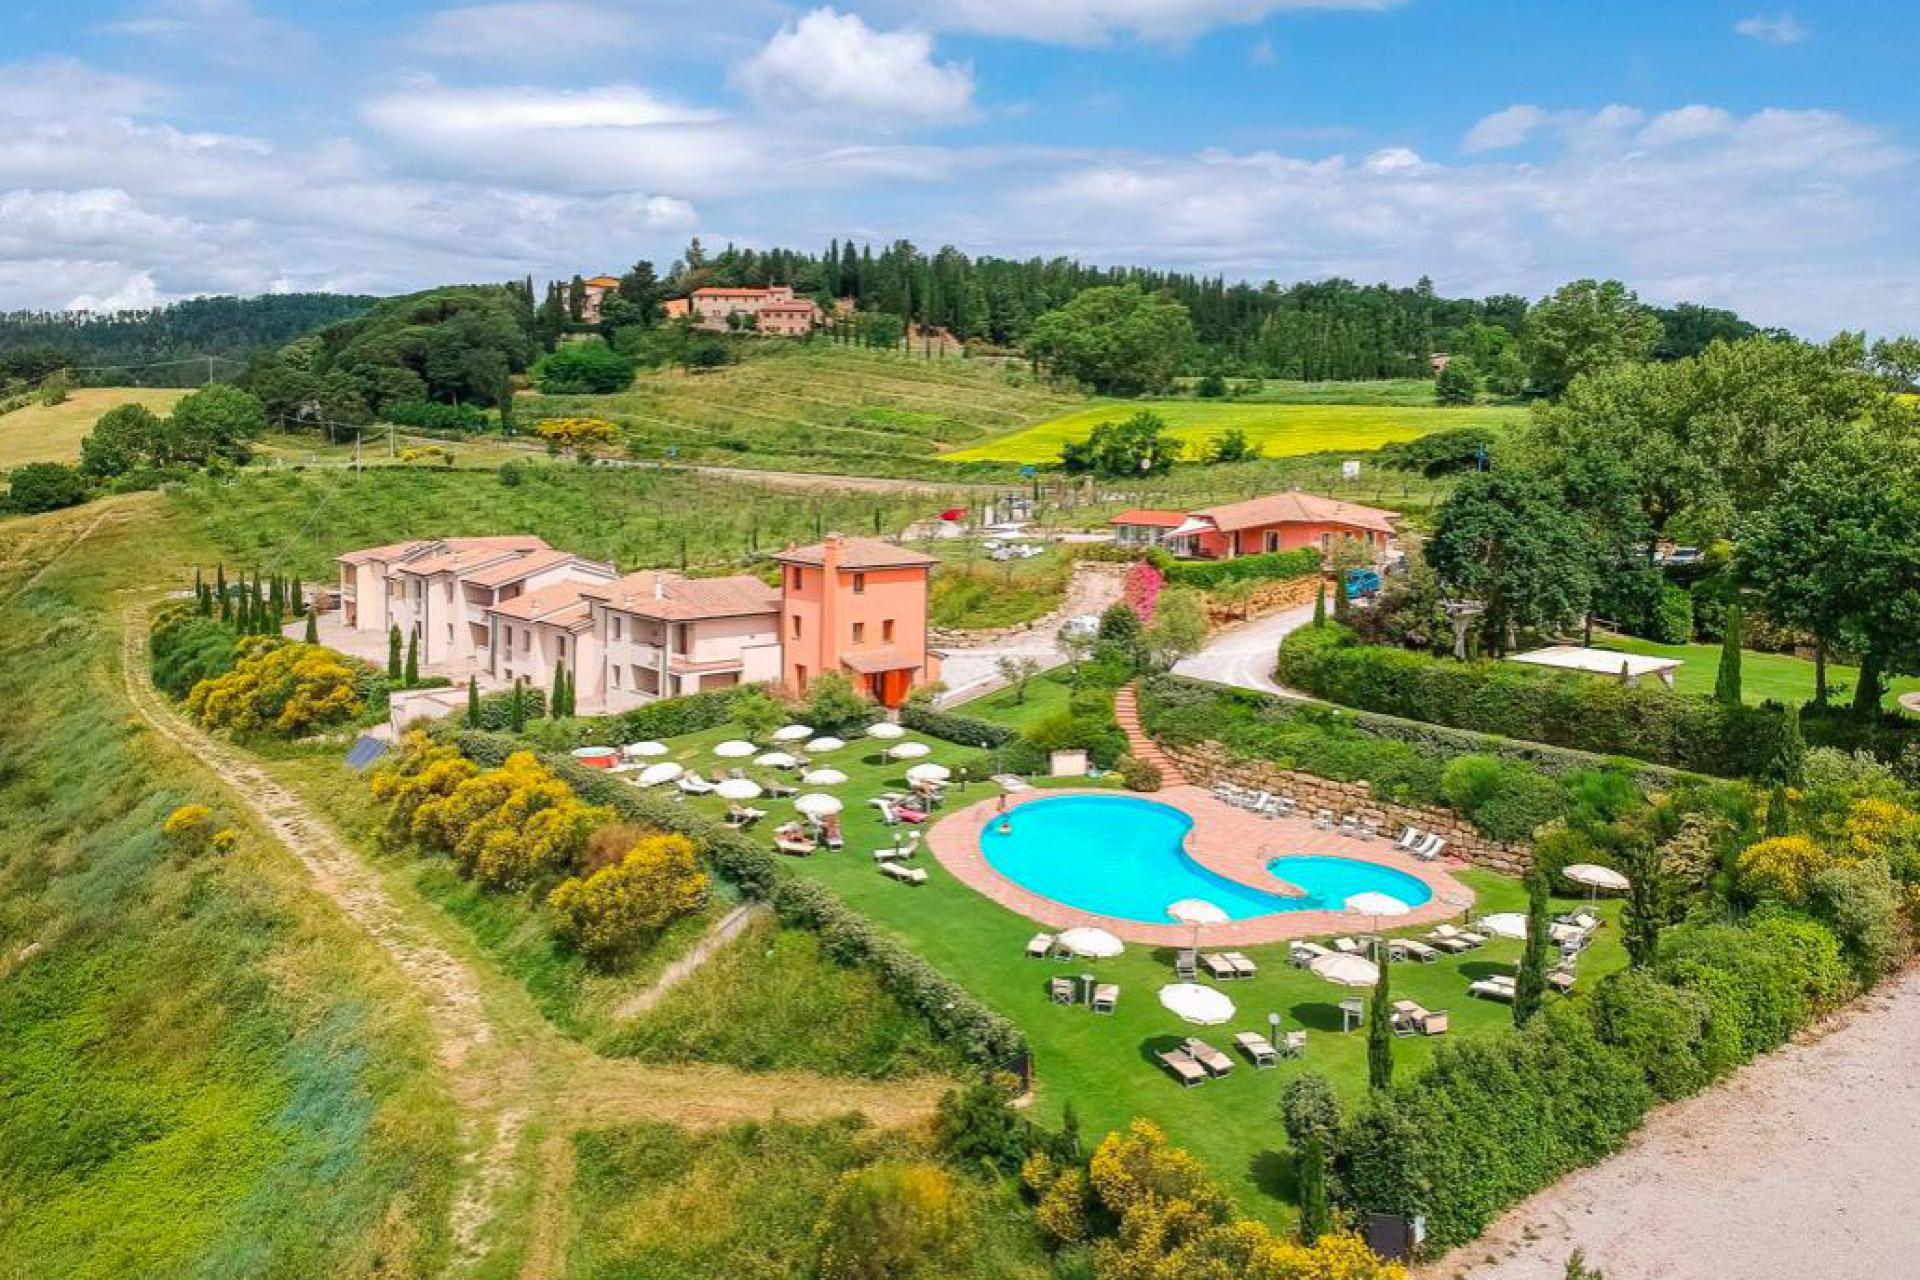 Large agriturismo in Tuscany with stunning views